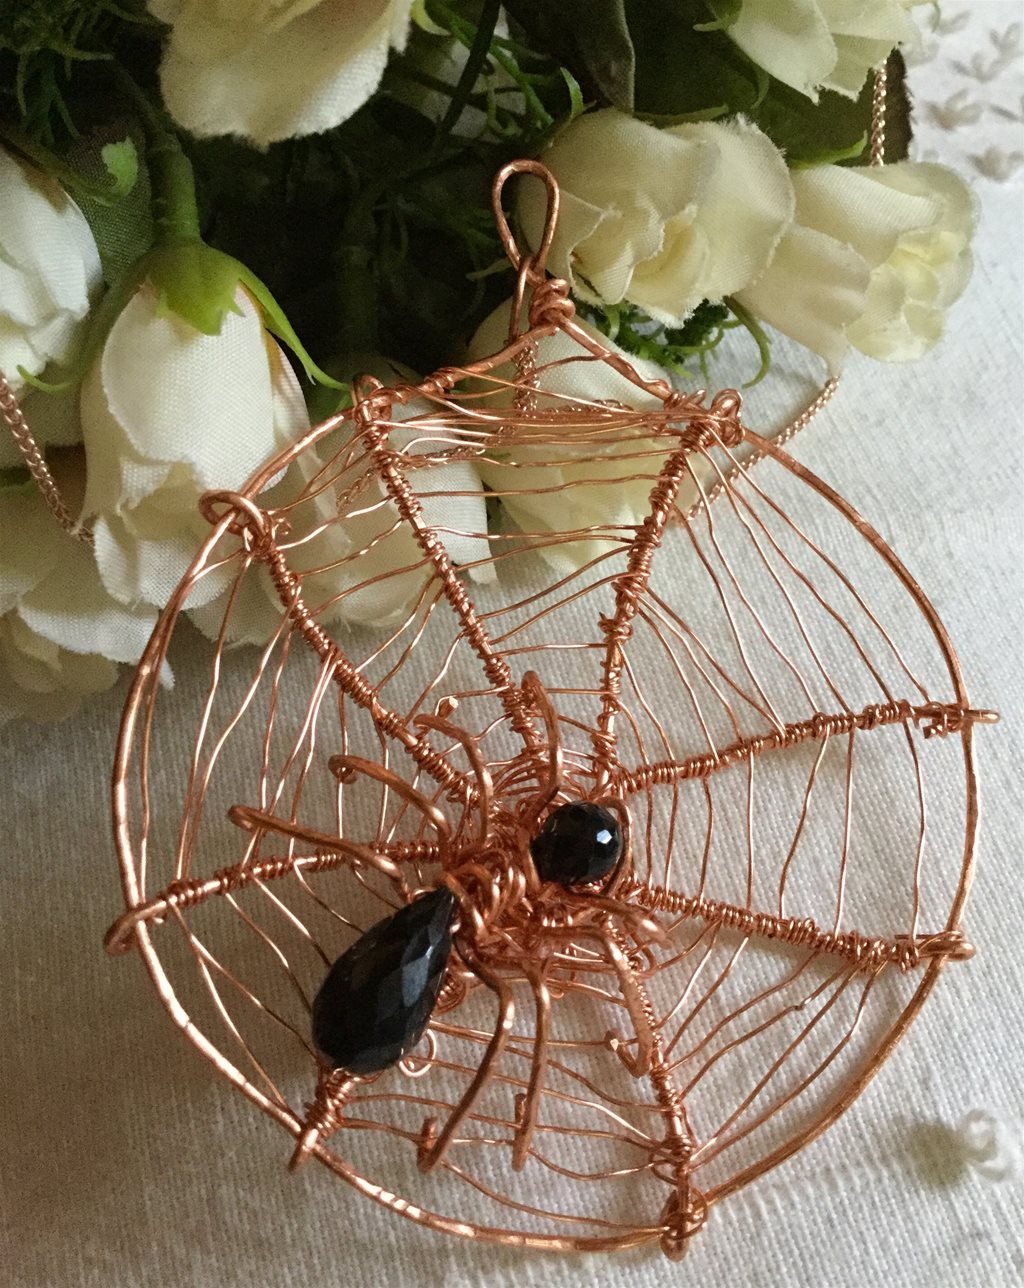 Harry Potter Spider large rose gold cover wire spiders Web with gem of Black Spinel Spider - Image 2 of 4